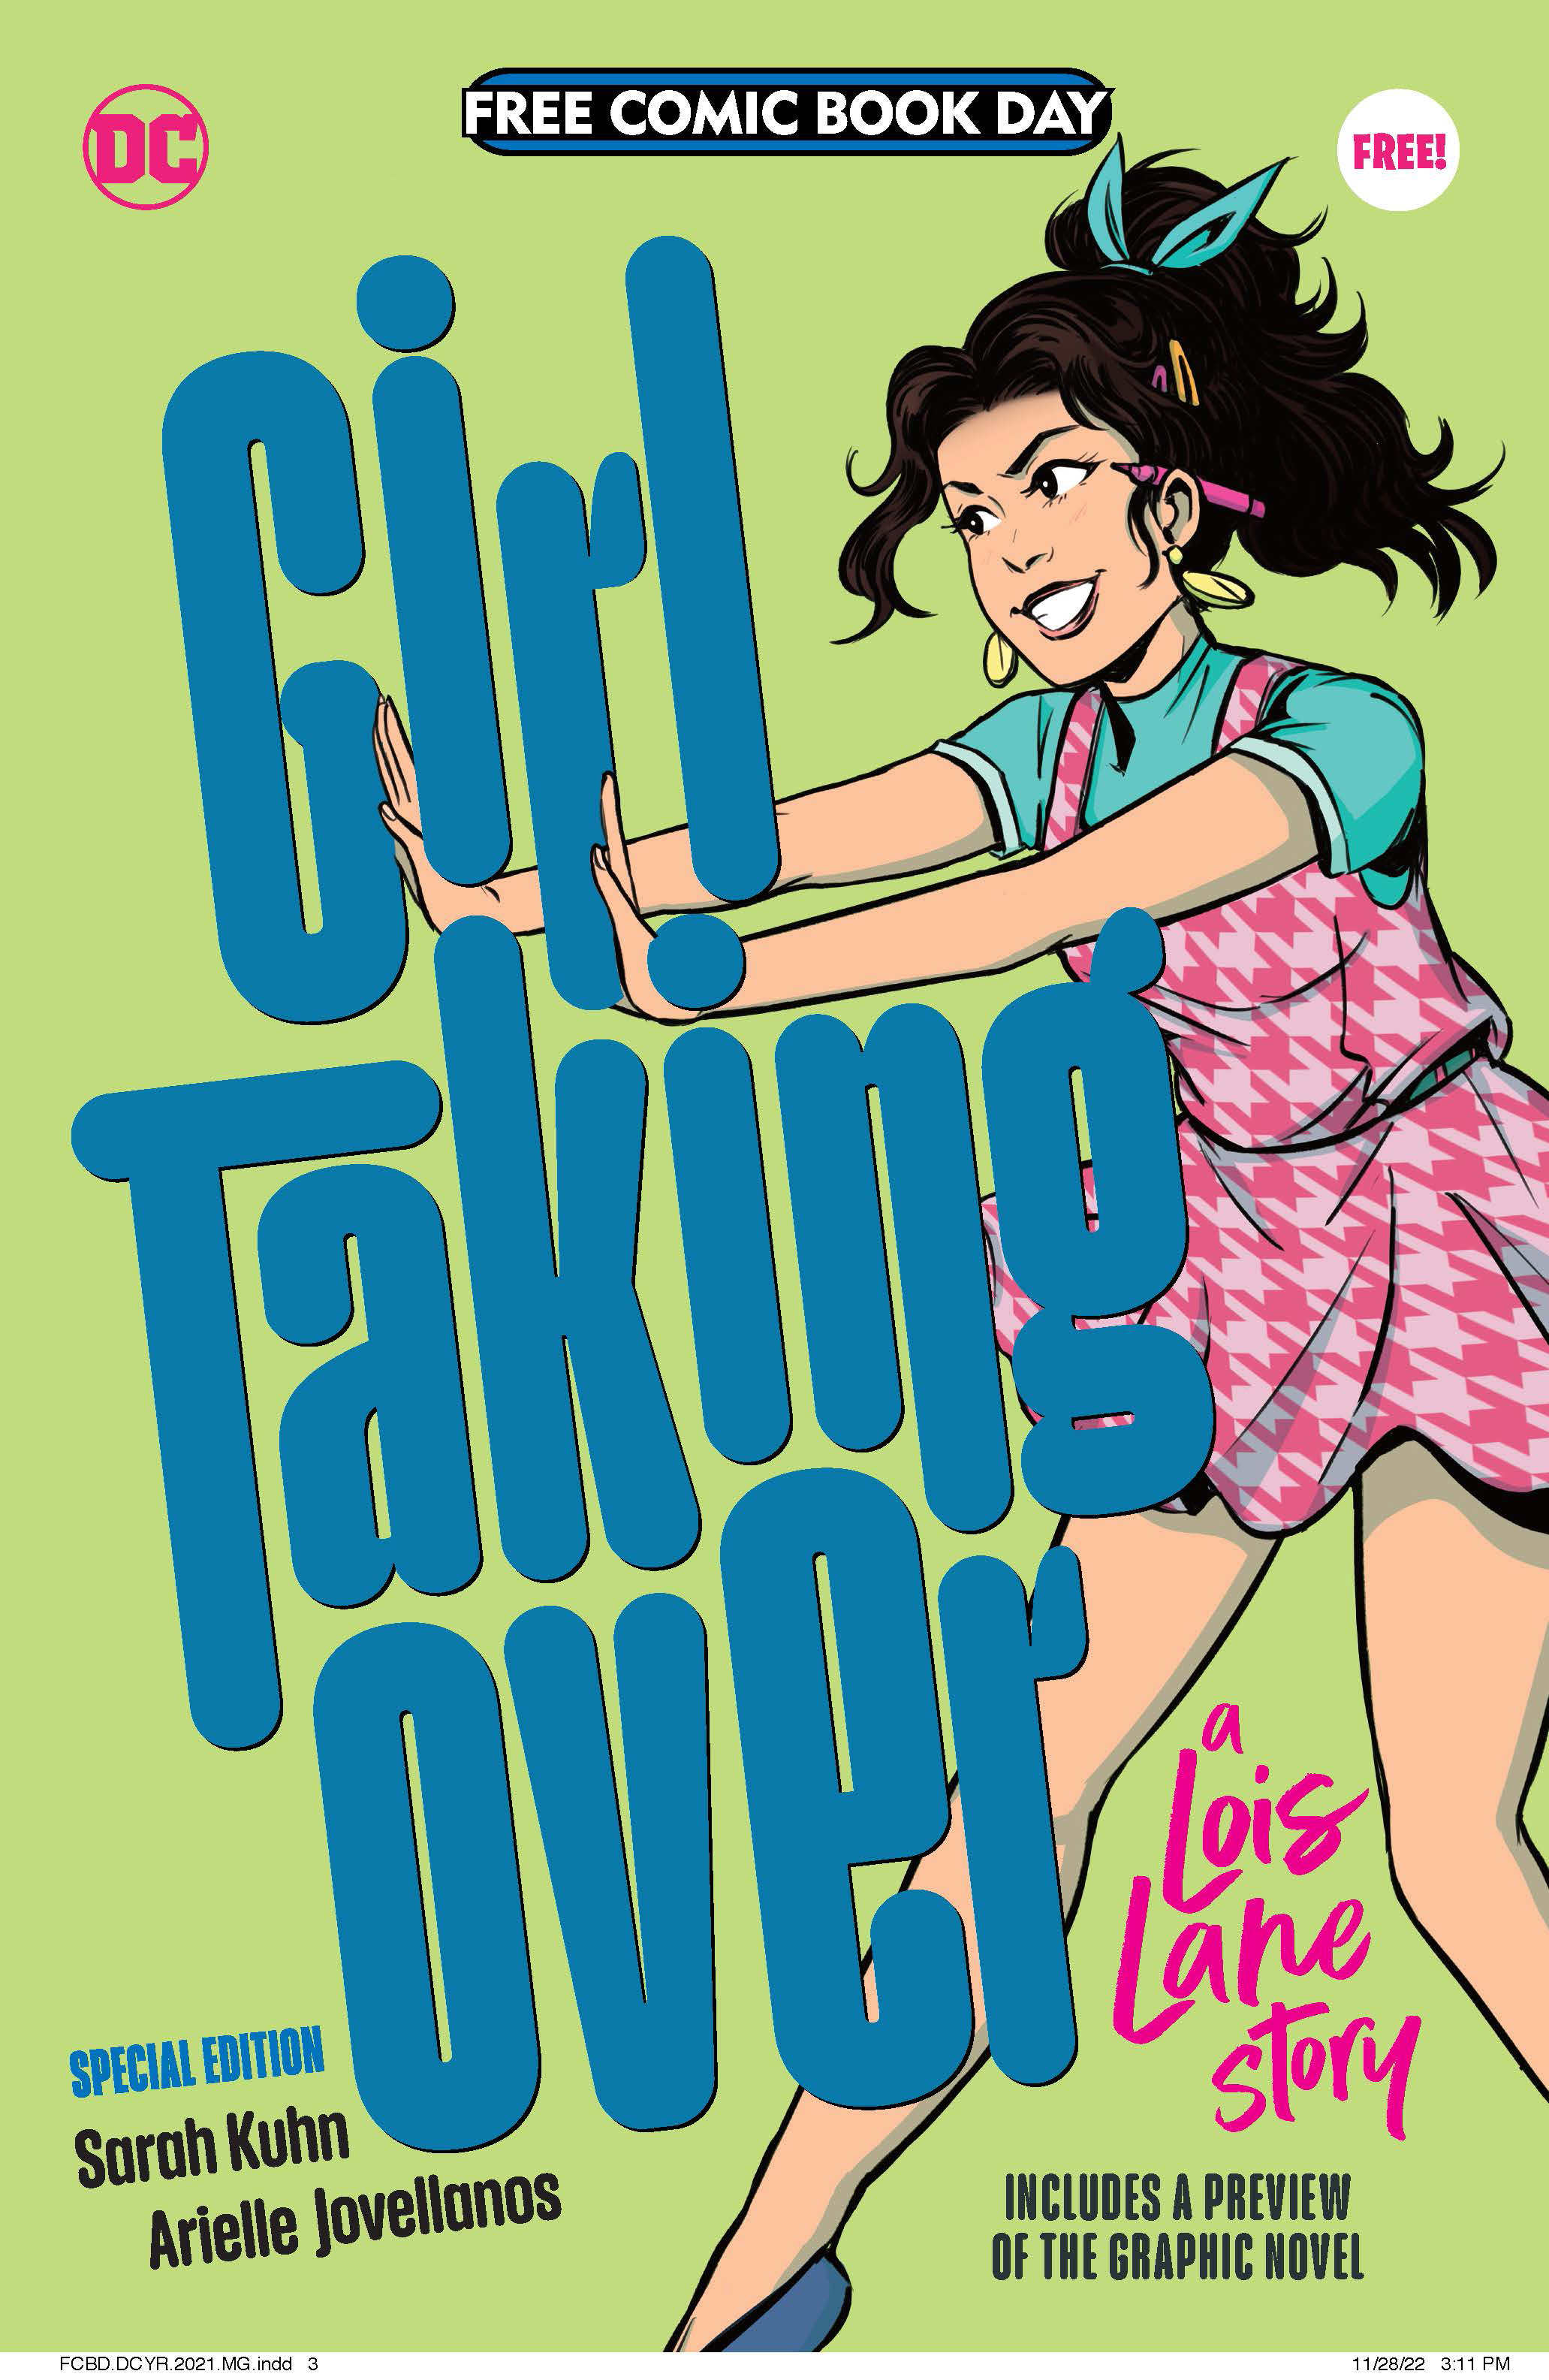 FCBD 2023 - Bundle of 25 - Girl Taking Over A Lois Lane Story Special Edition